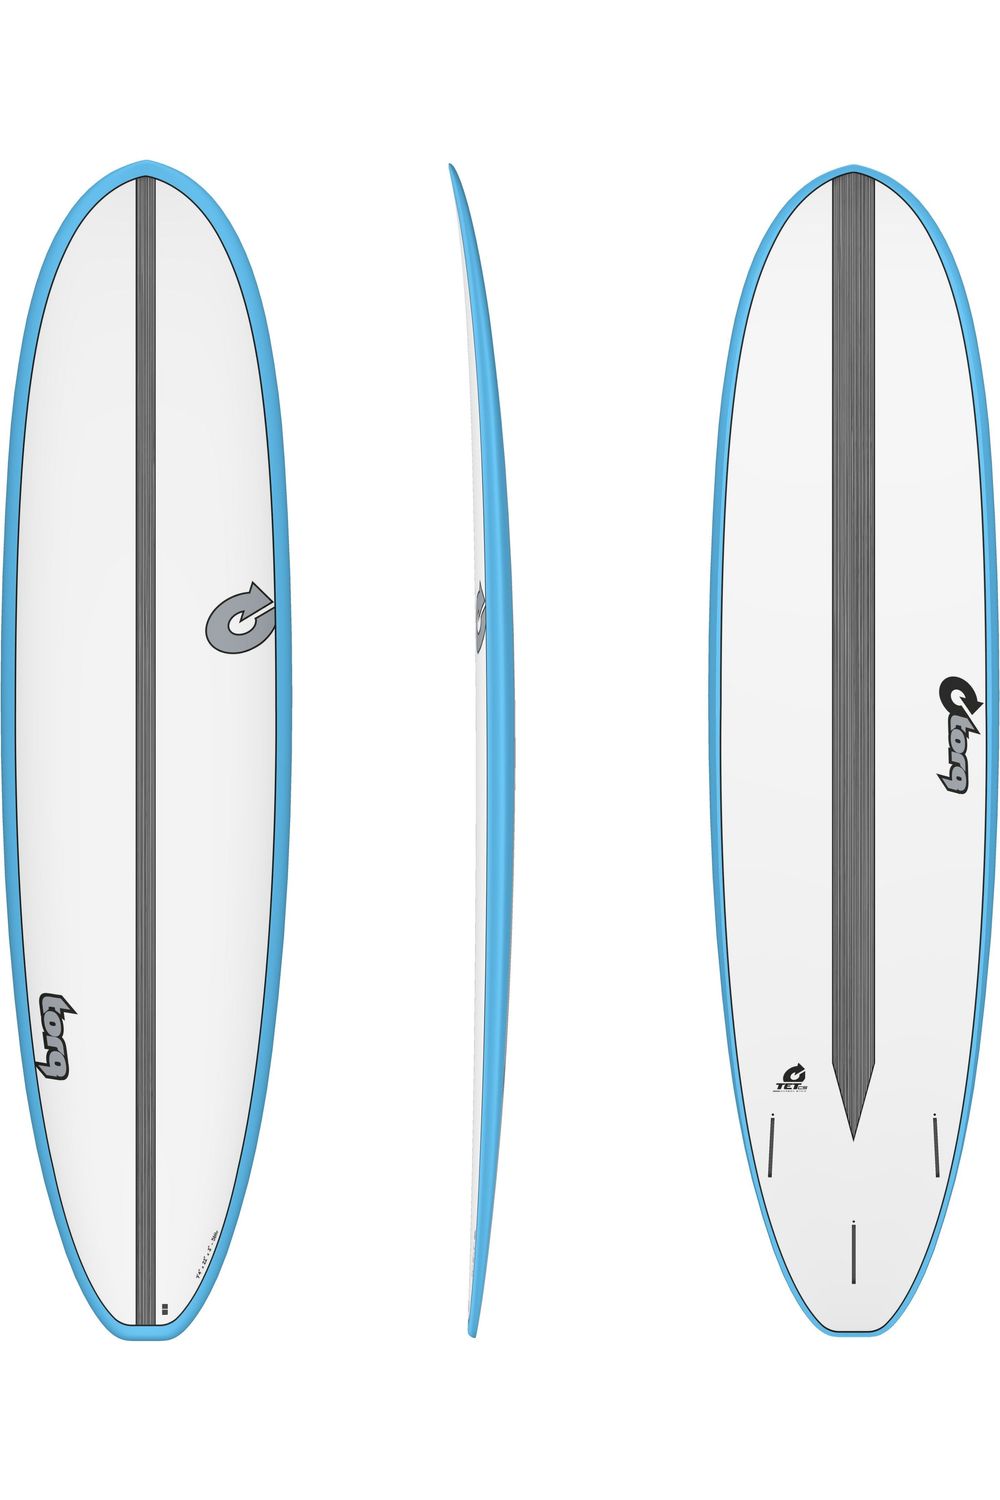 7'4 Torq Fun V Surfboard in White & Blue with Carbon Strip